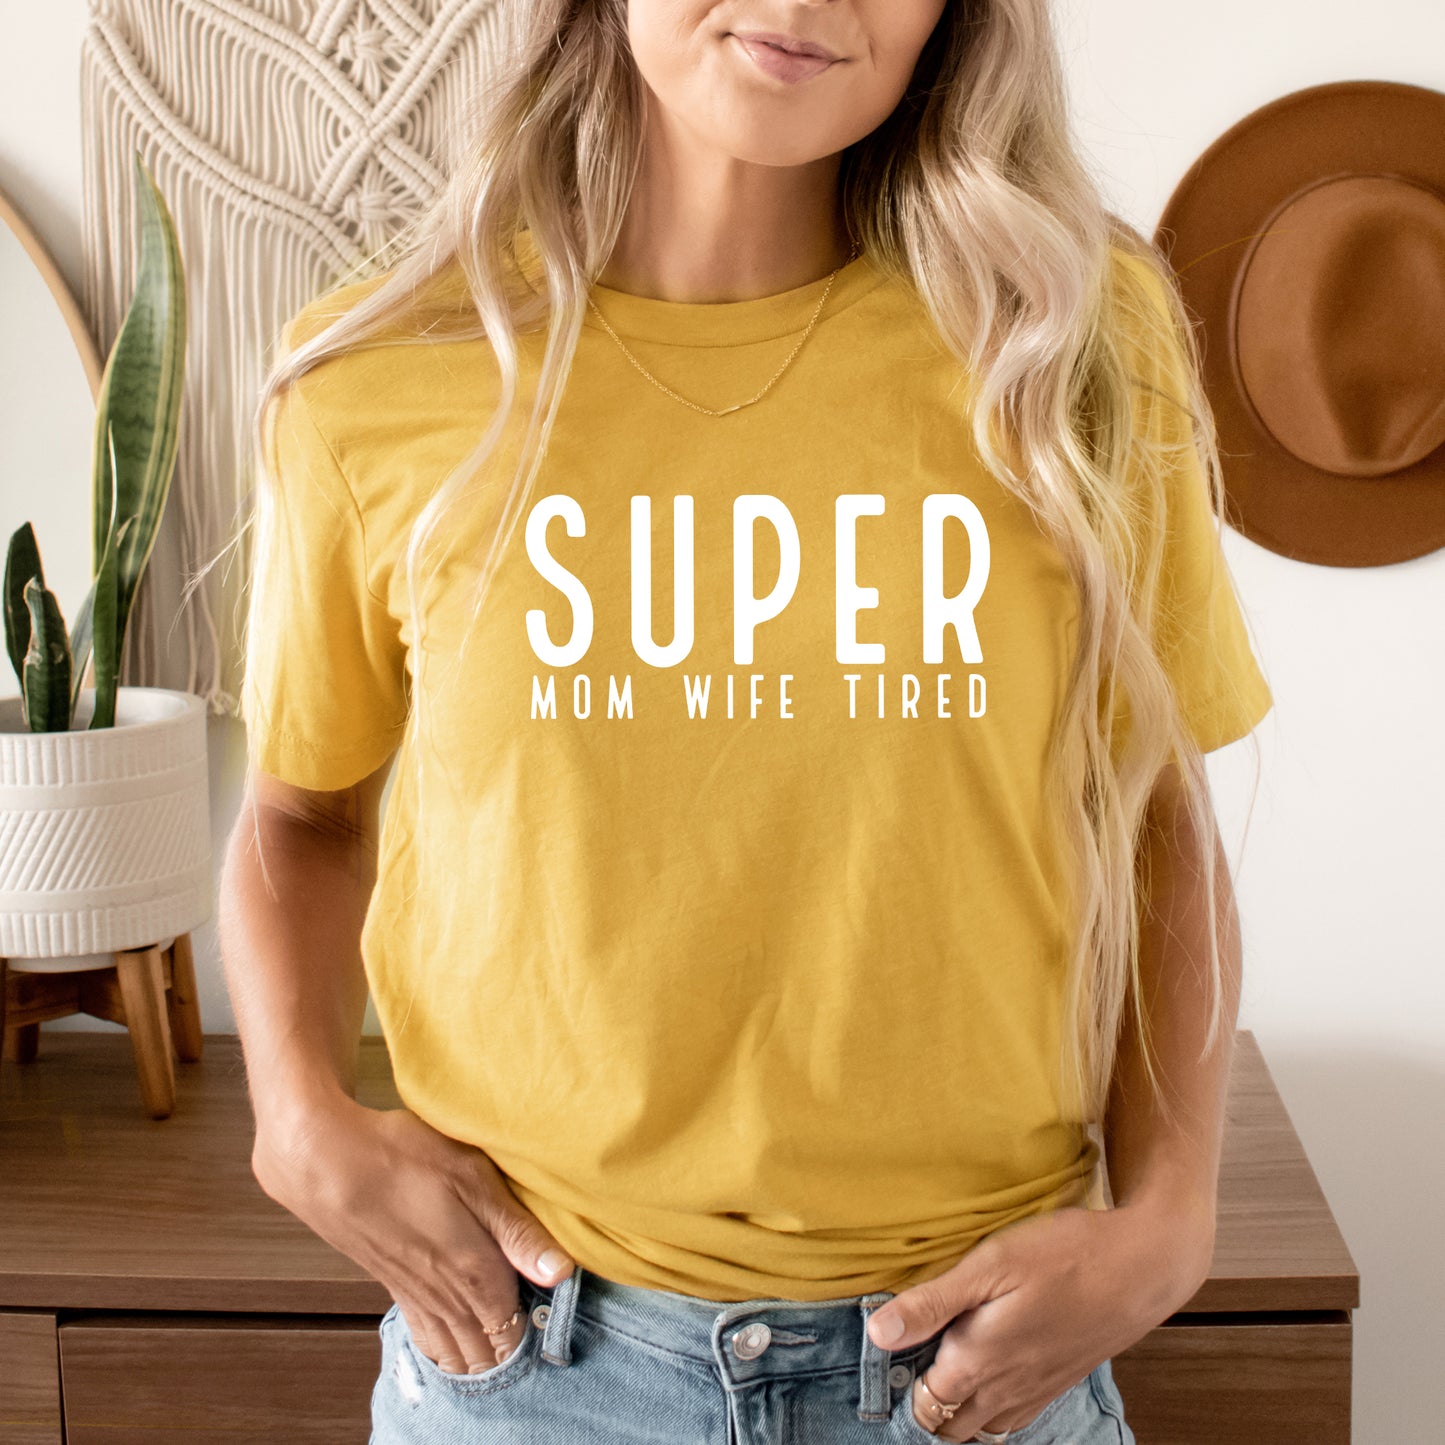 Super Mom Wife Tired | Short Sleeve Crew Neck